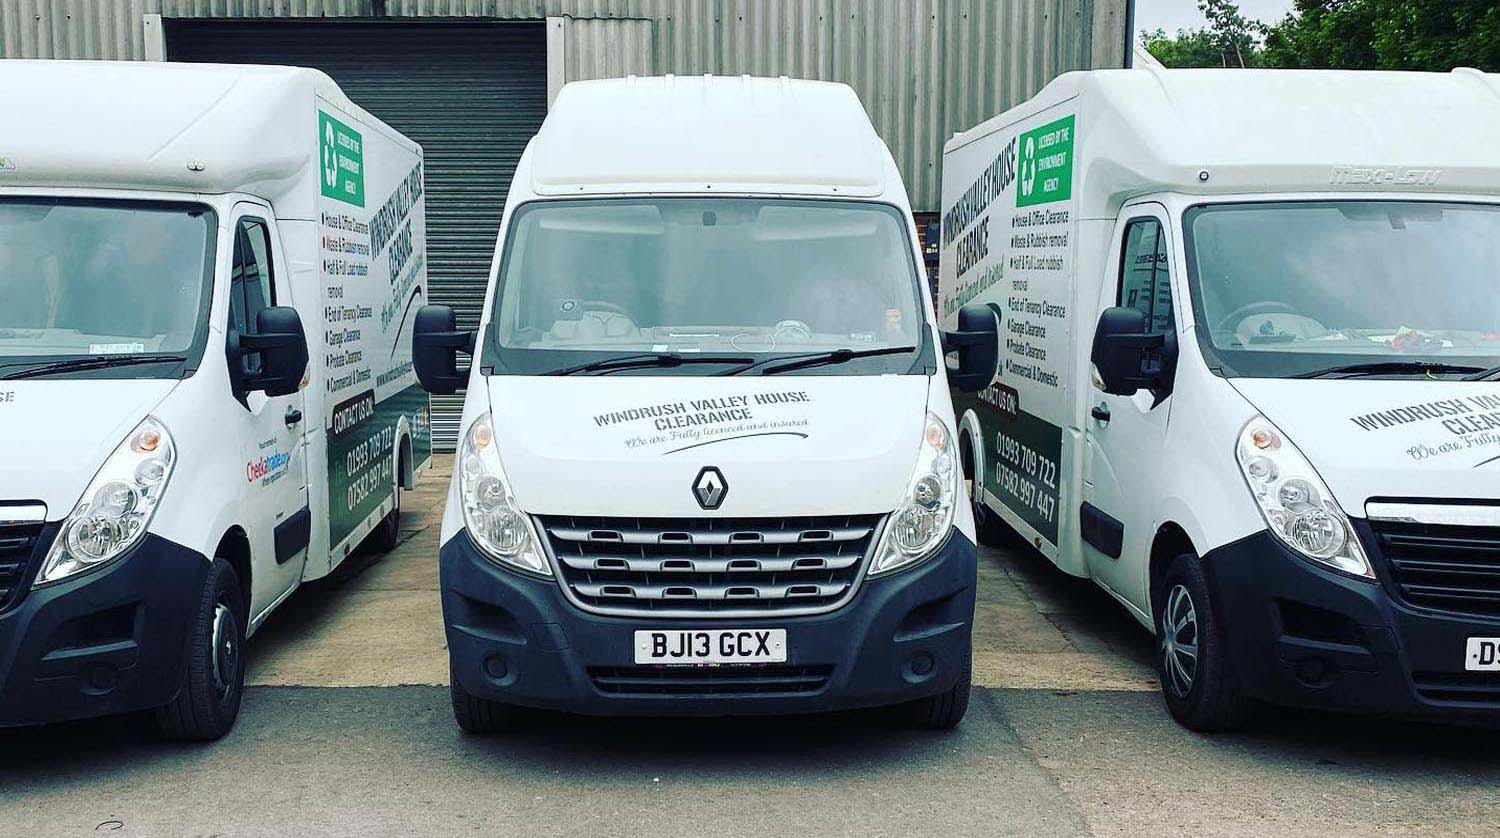 House clearance Chipping Norton vans